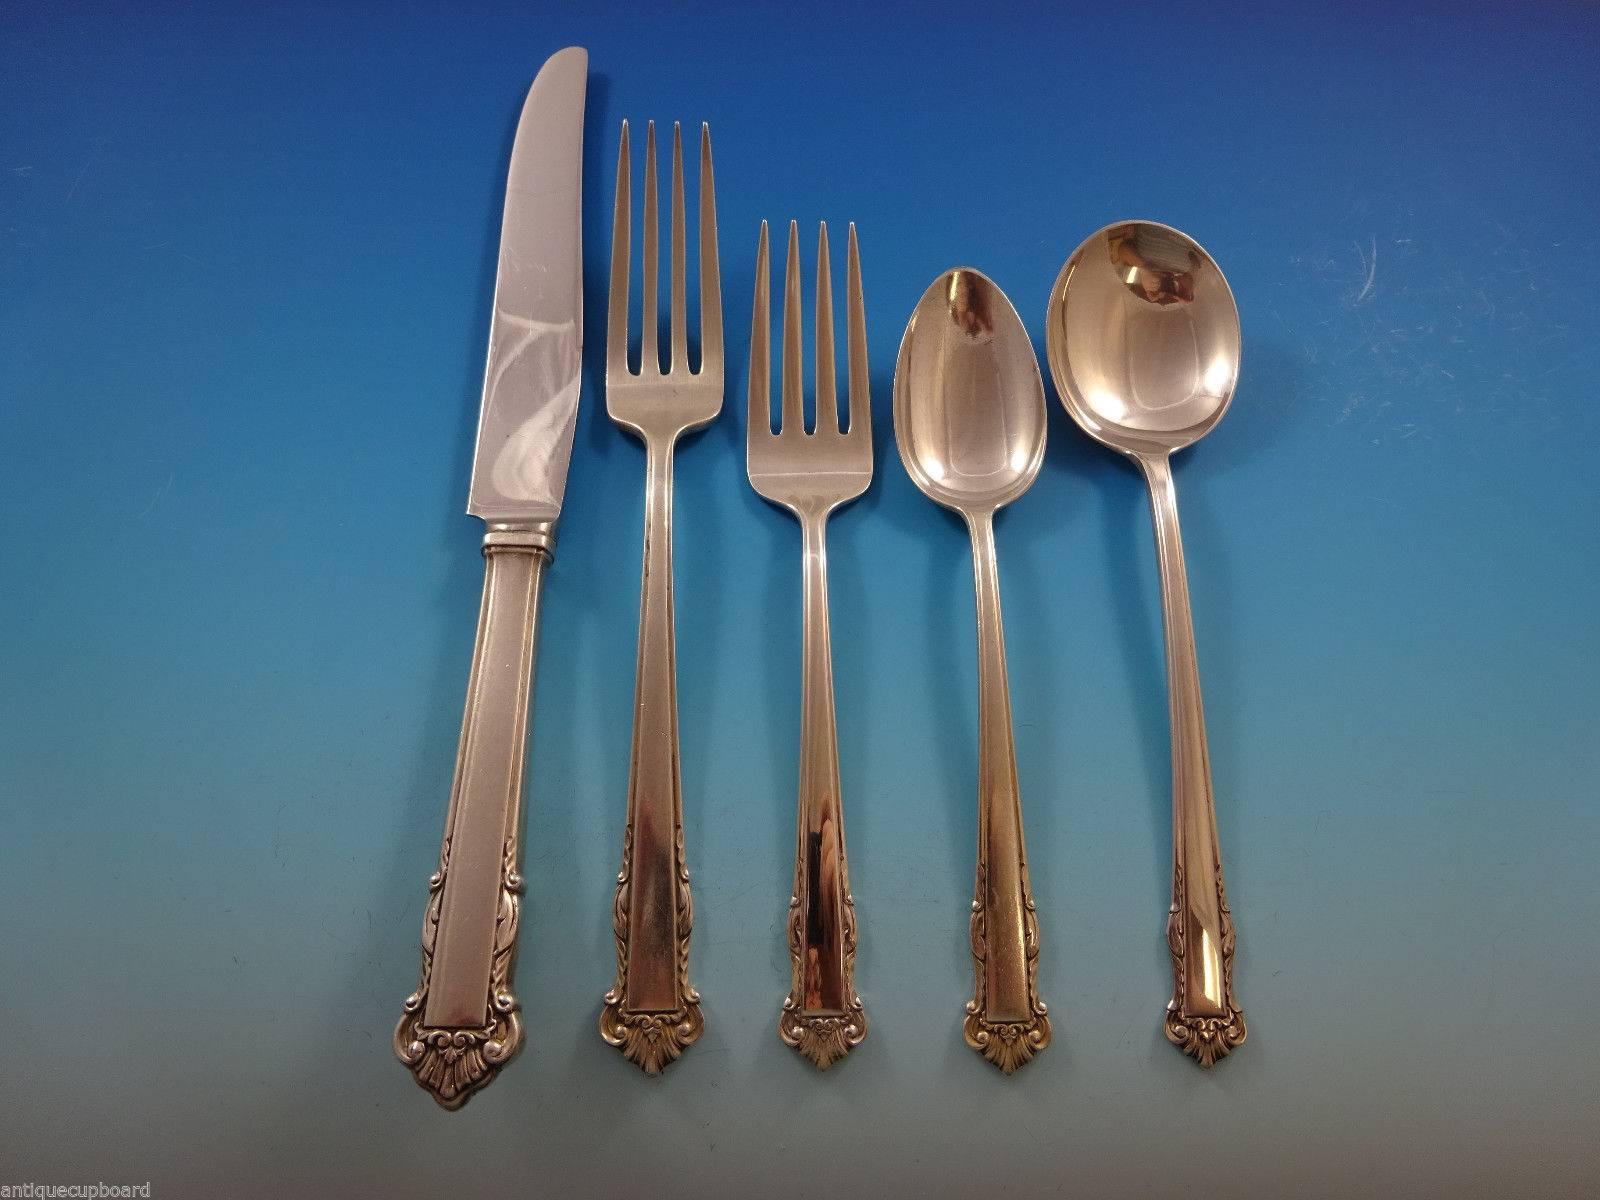 Beautiful English Shell by Lunt sterling silver flatware set of 68 pieces. This set includes:

12 knives, 8 7/8